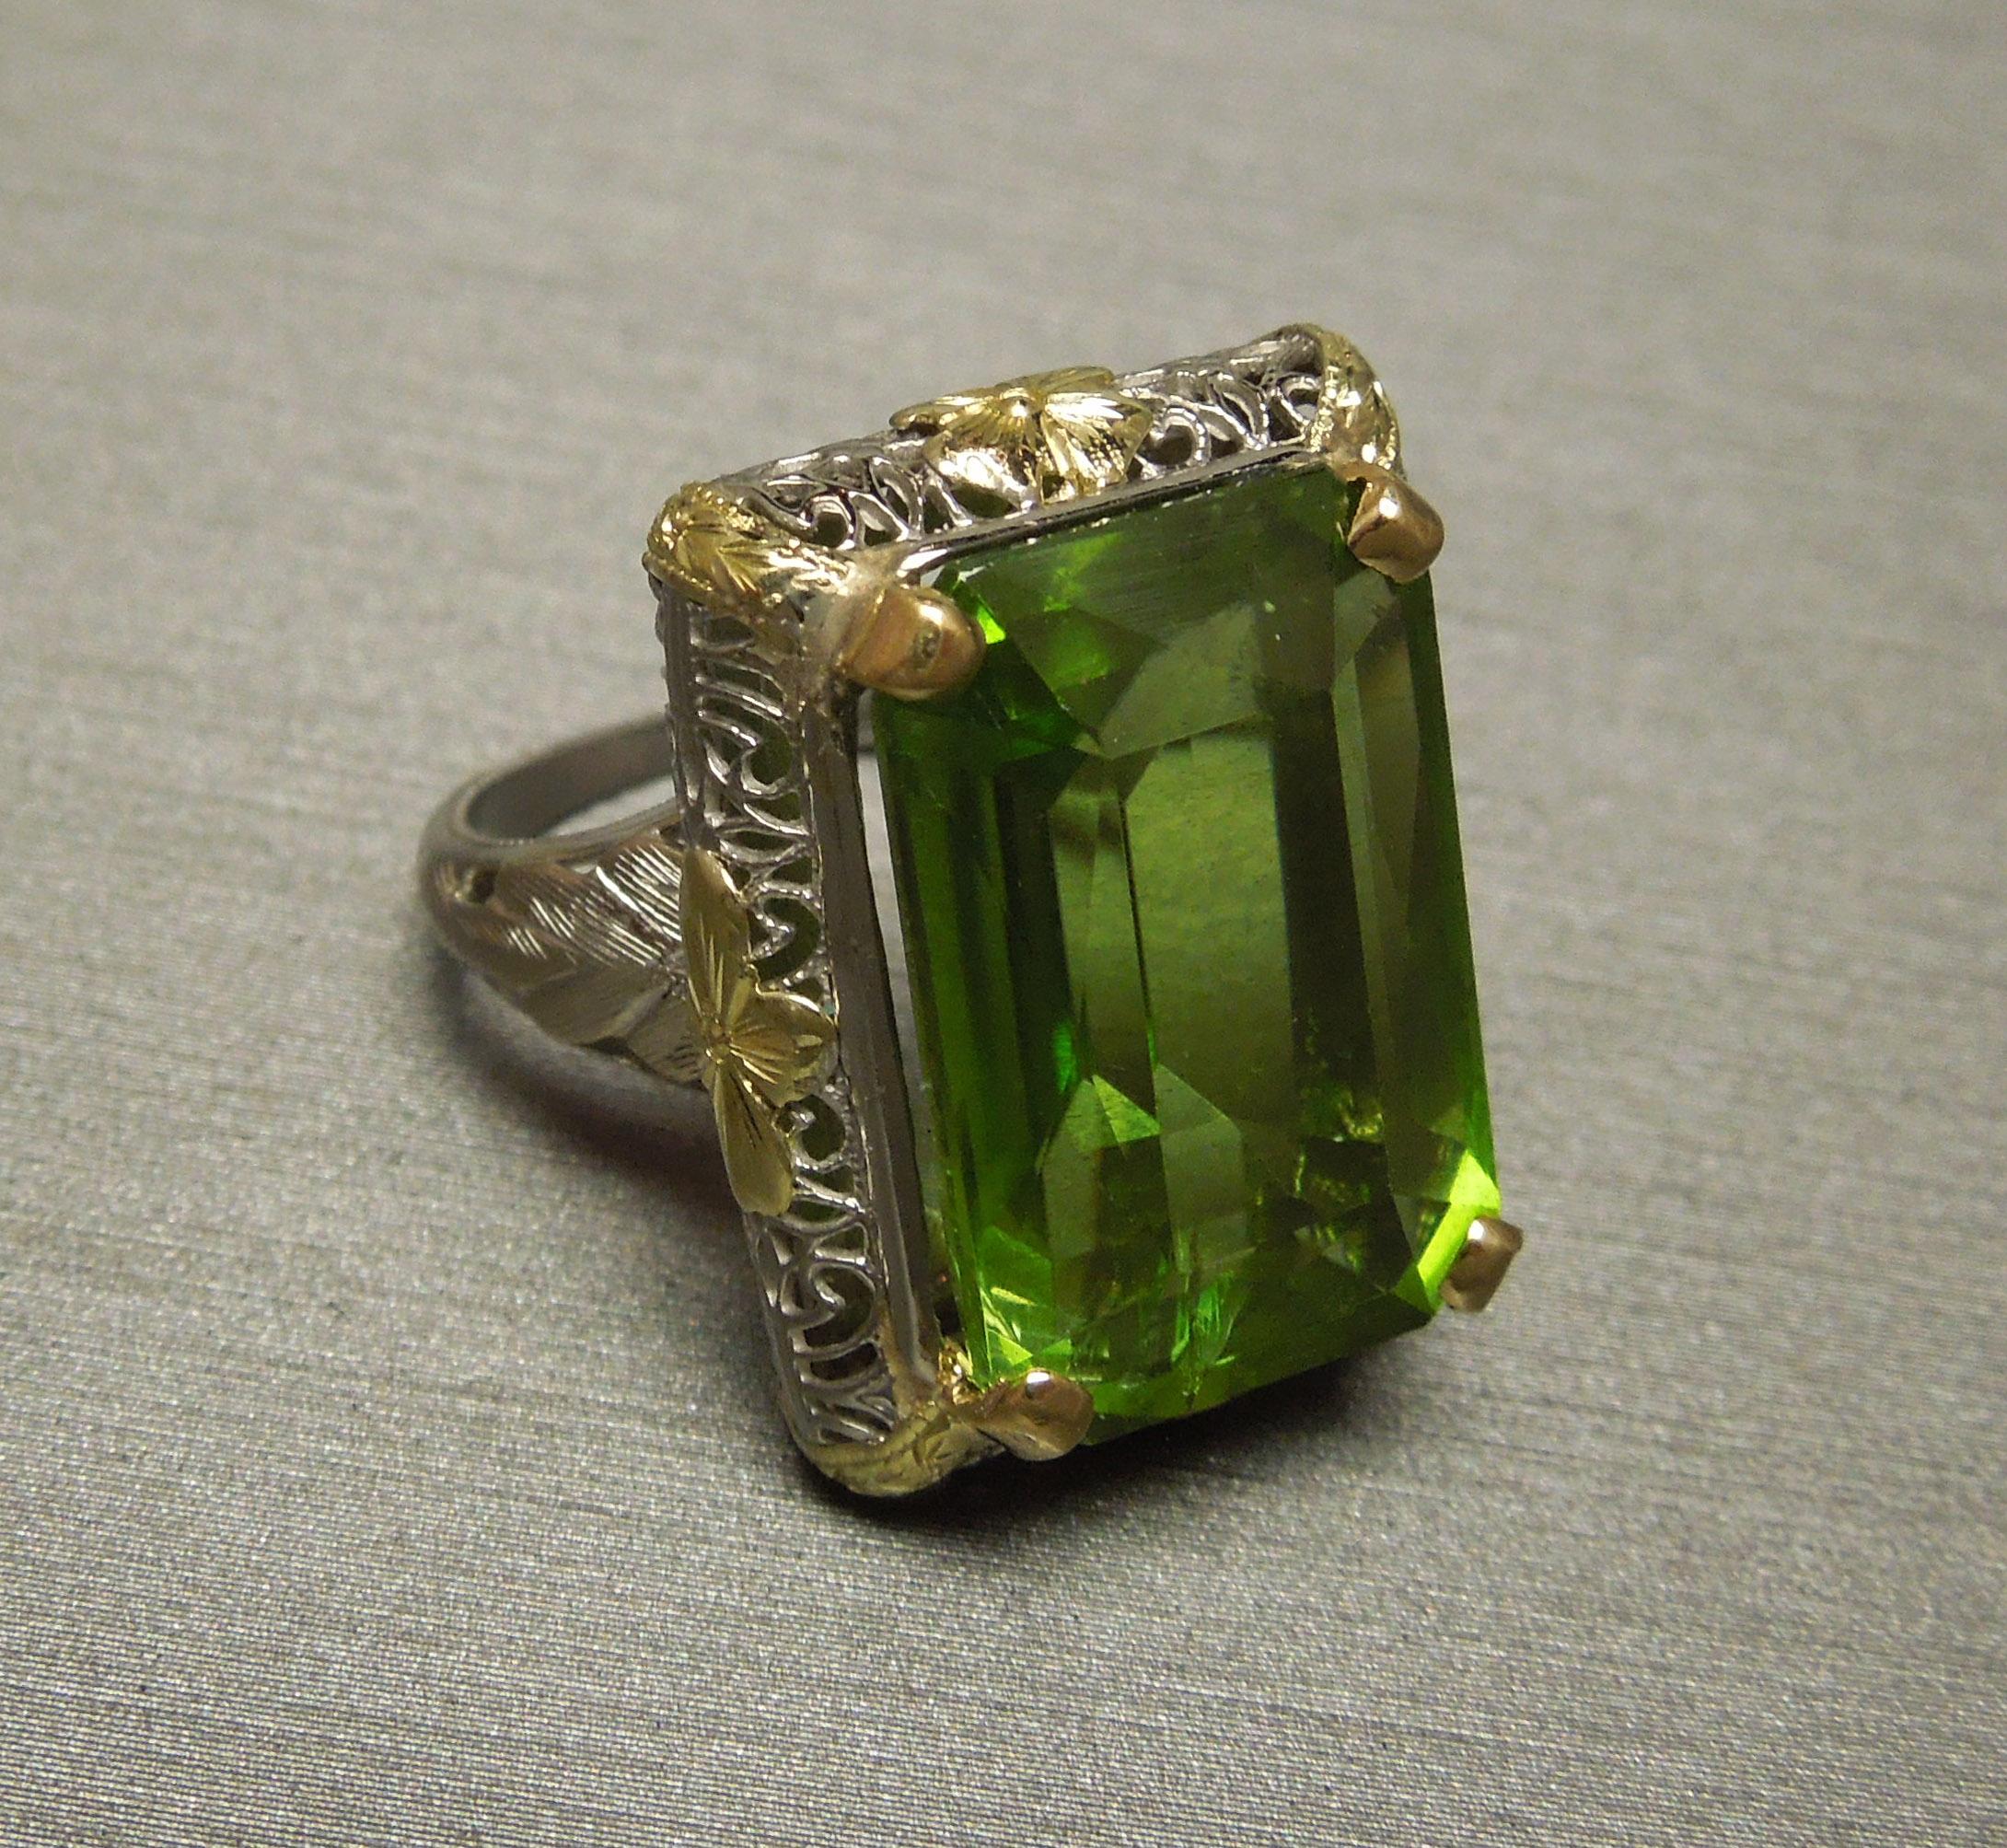 This Antique Peridot Solitaire ring features a GIA Certified Emerald cut 15.40 carat Peridot at 18mm x 11.5mm is securely set in four 18KT Yellow Gold prongs in an intricate Filigree 18KT White, Green & Yellow Gold mounting. [The most desired